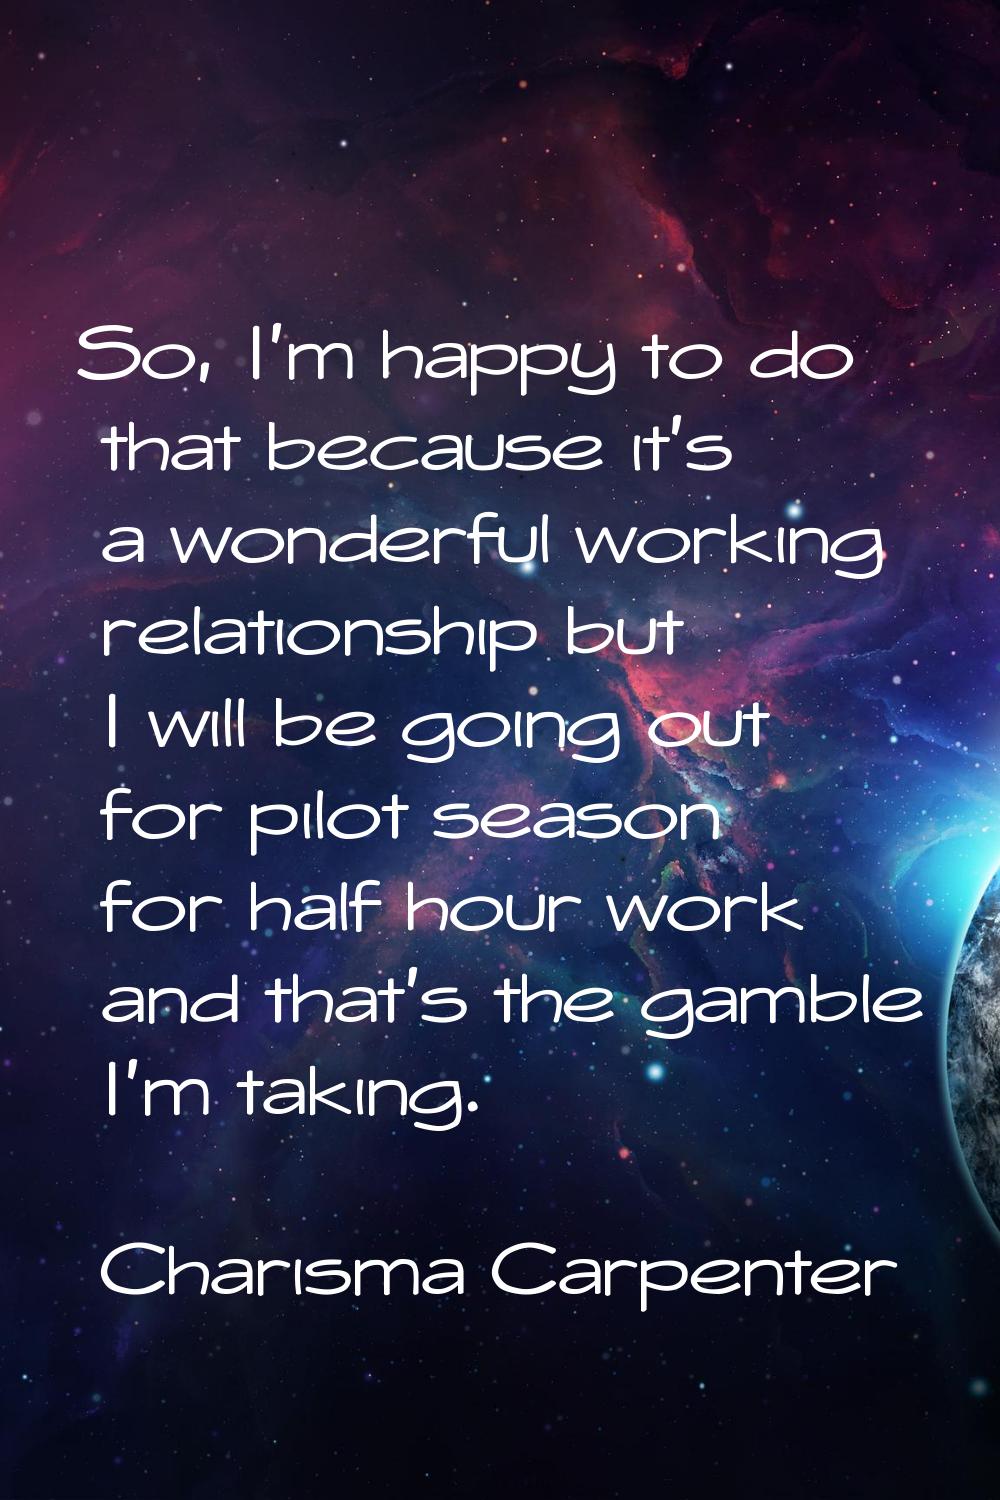 So, I'm happy to do that because it's a wonderful working relationship but I will be going out for 